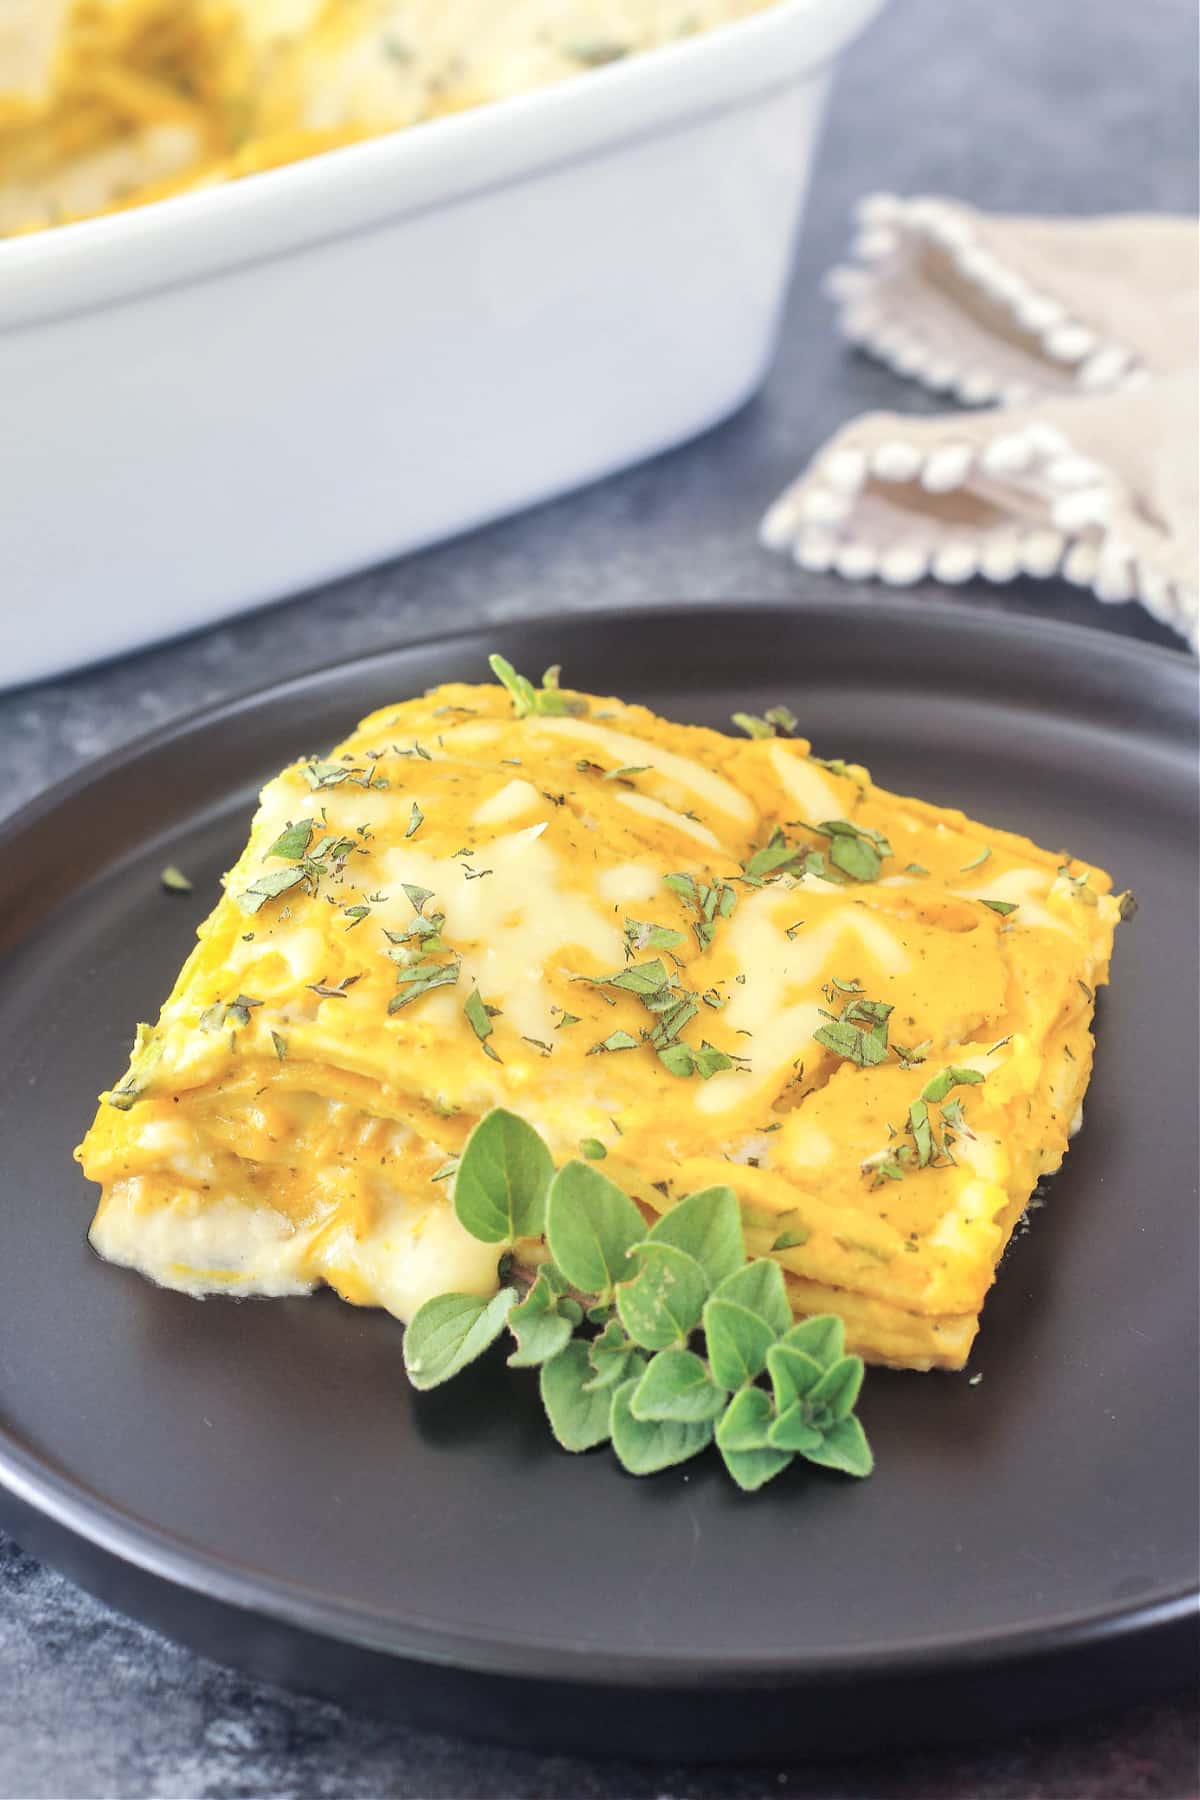 One serving of butternut sage lasagna on a matte black plate, with the white ceramic baking dish of lasagna blurred in the background. Lasagna is garnished with chopped fresh oregano and one whole sprig of oregano.